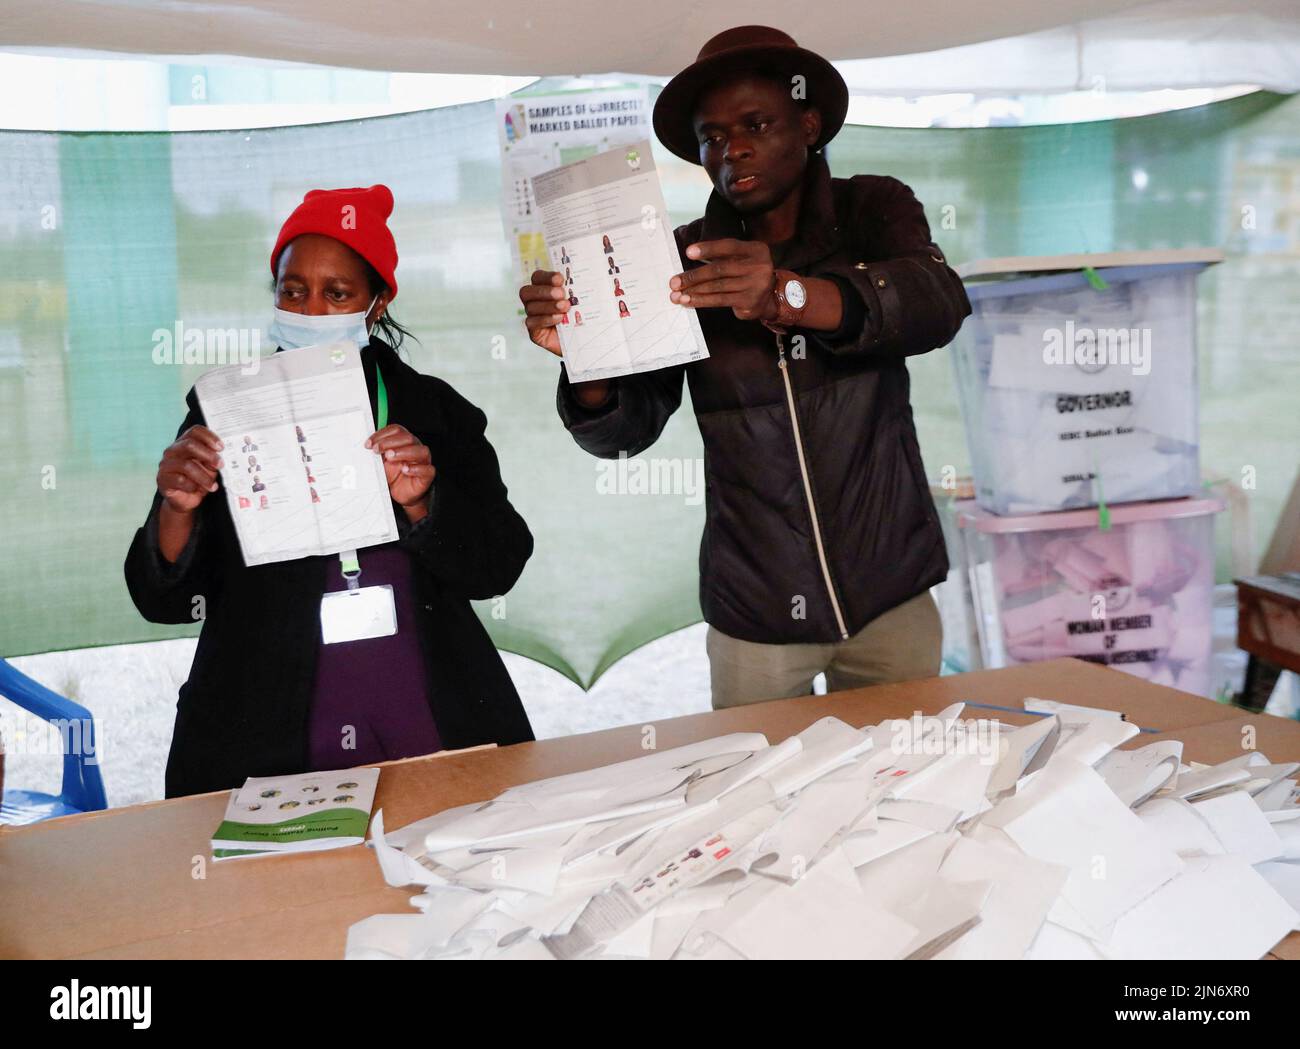 Electoral officials count cast ballot papers during the general election conducted by the Independent Electoral and Boundaries Commission (IEBC) at the close of the voting process at the Moi Avenue Primary School in Nairobi, Kenya August 9, 2022. REUTERS/Thomas Mukoya Stock Photo